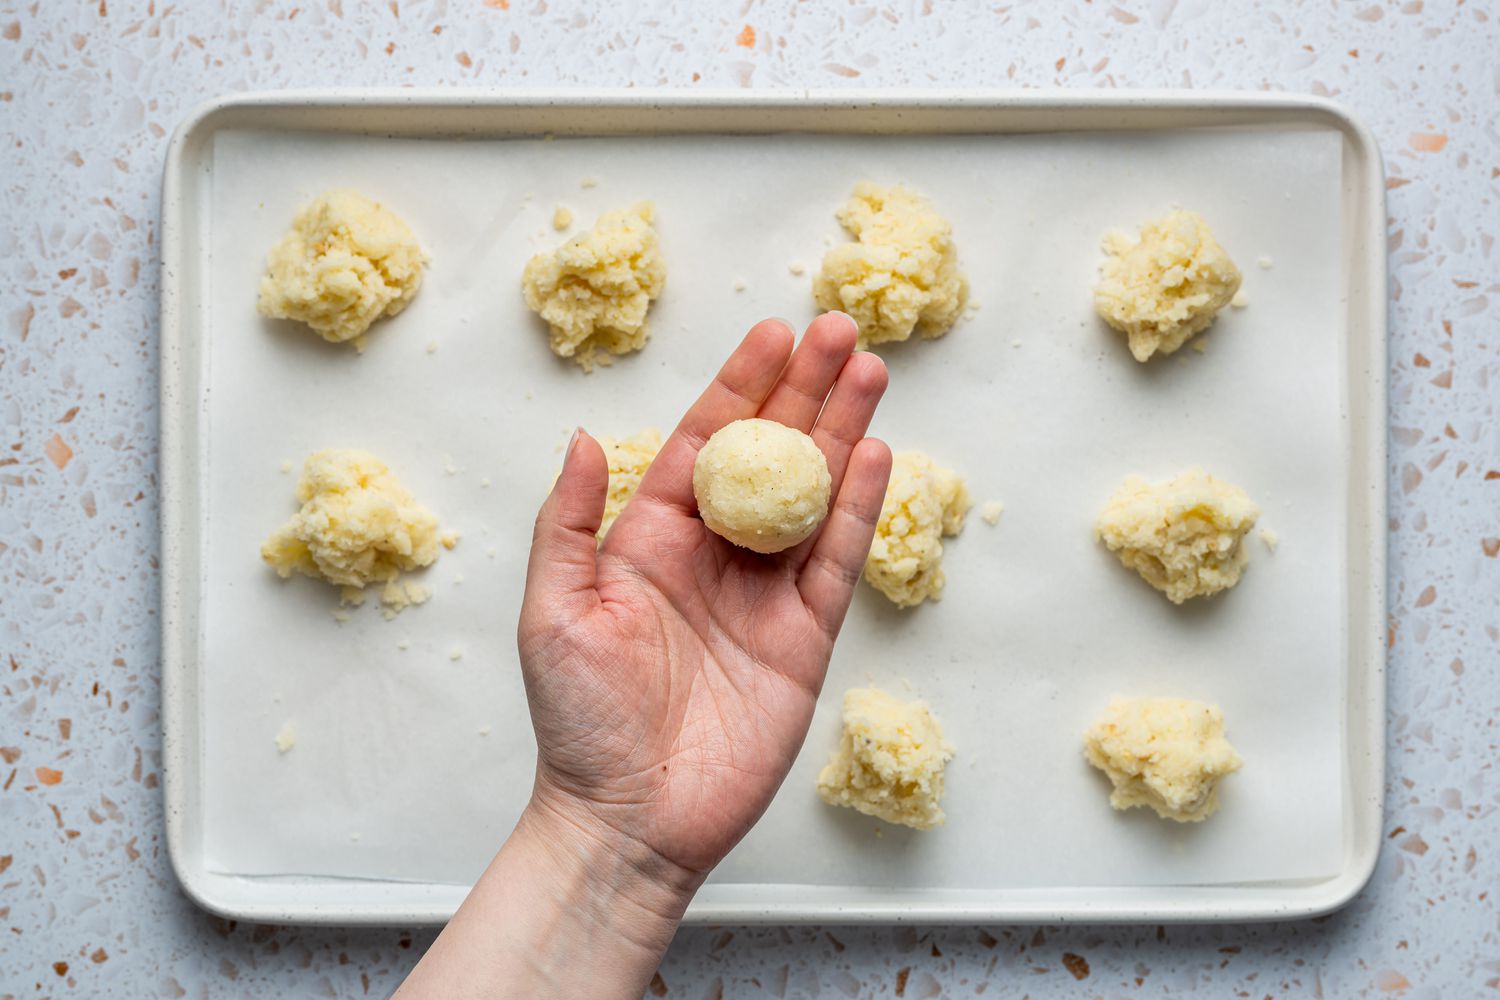 A hand holding a perfectly round portion of the coconut laddoo mixture, over a parchment paper-lined baking sheet of portioned dough